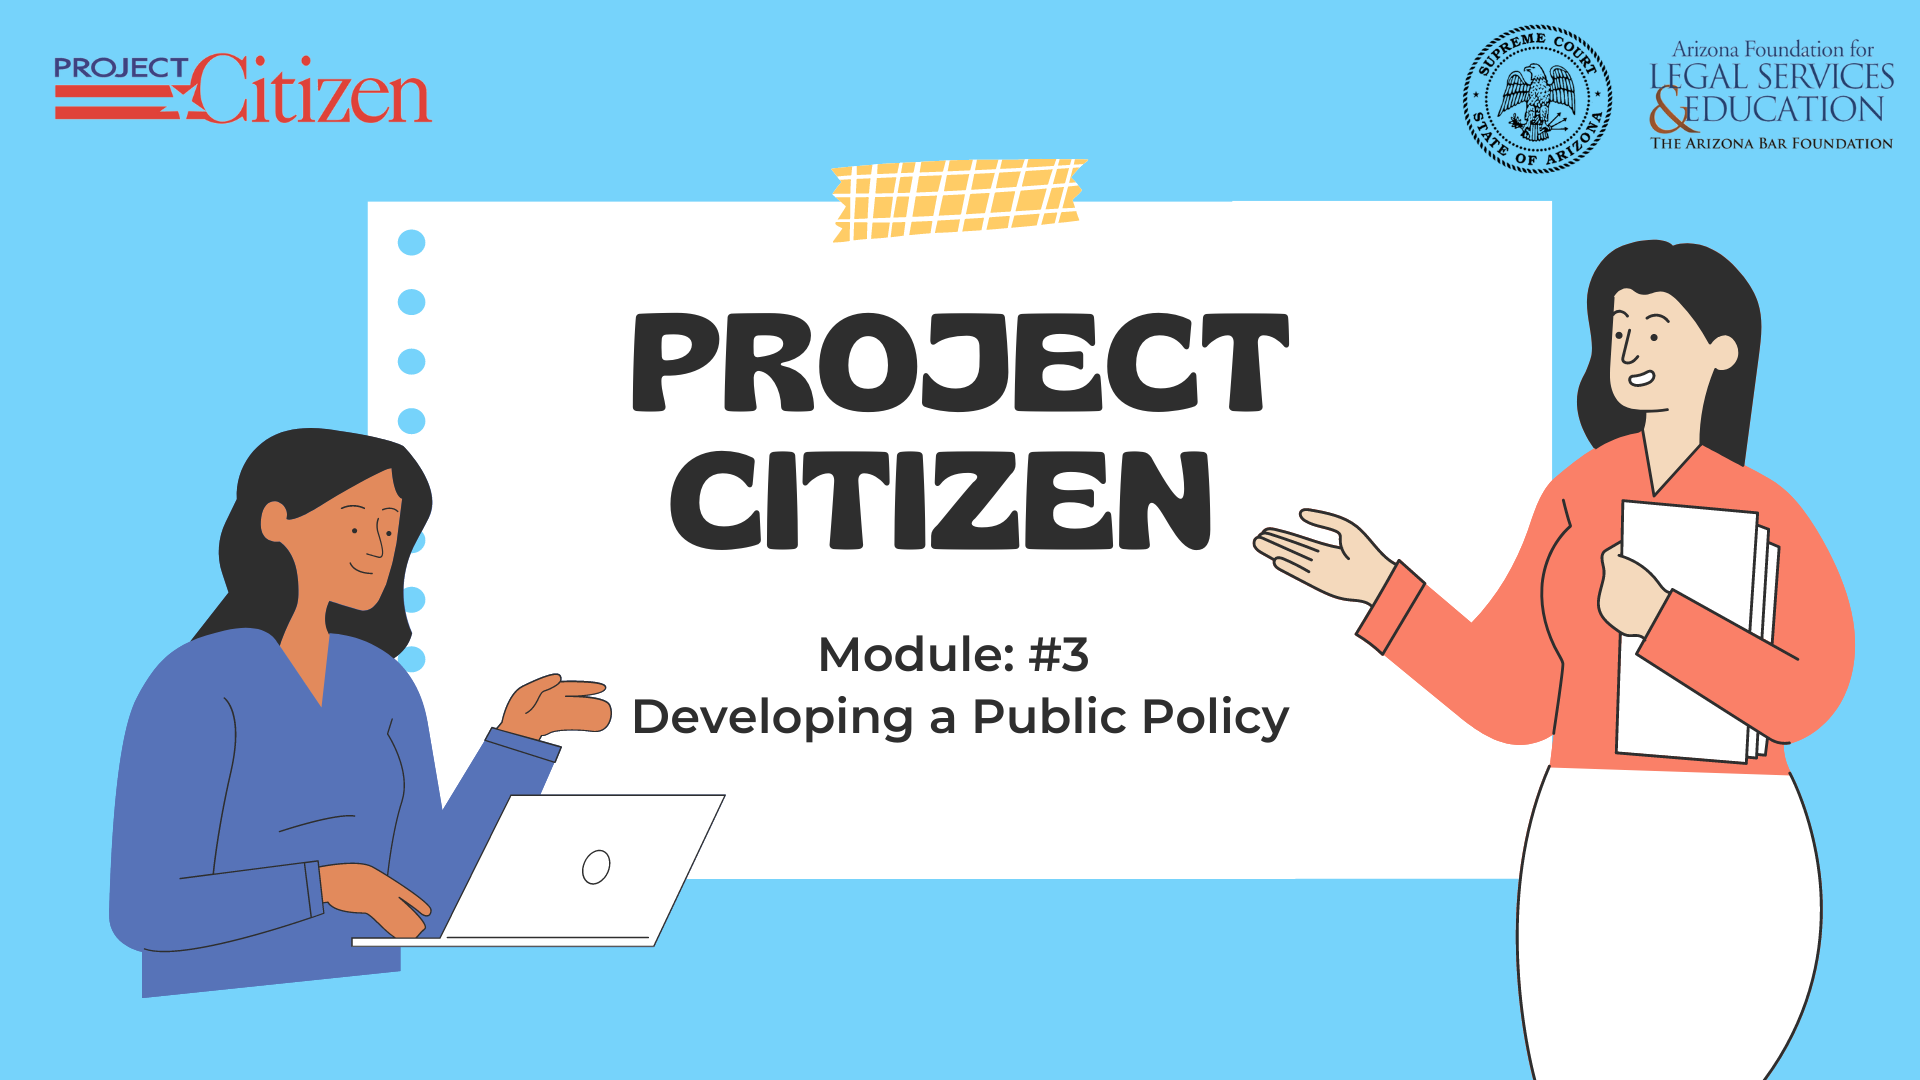 #3 Developing a Public Policy